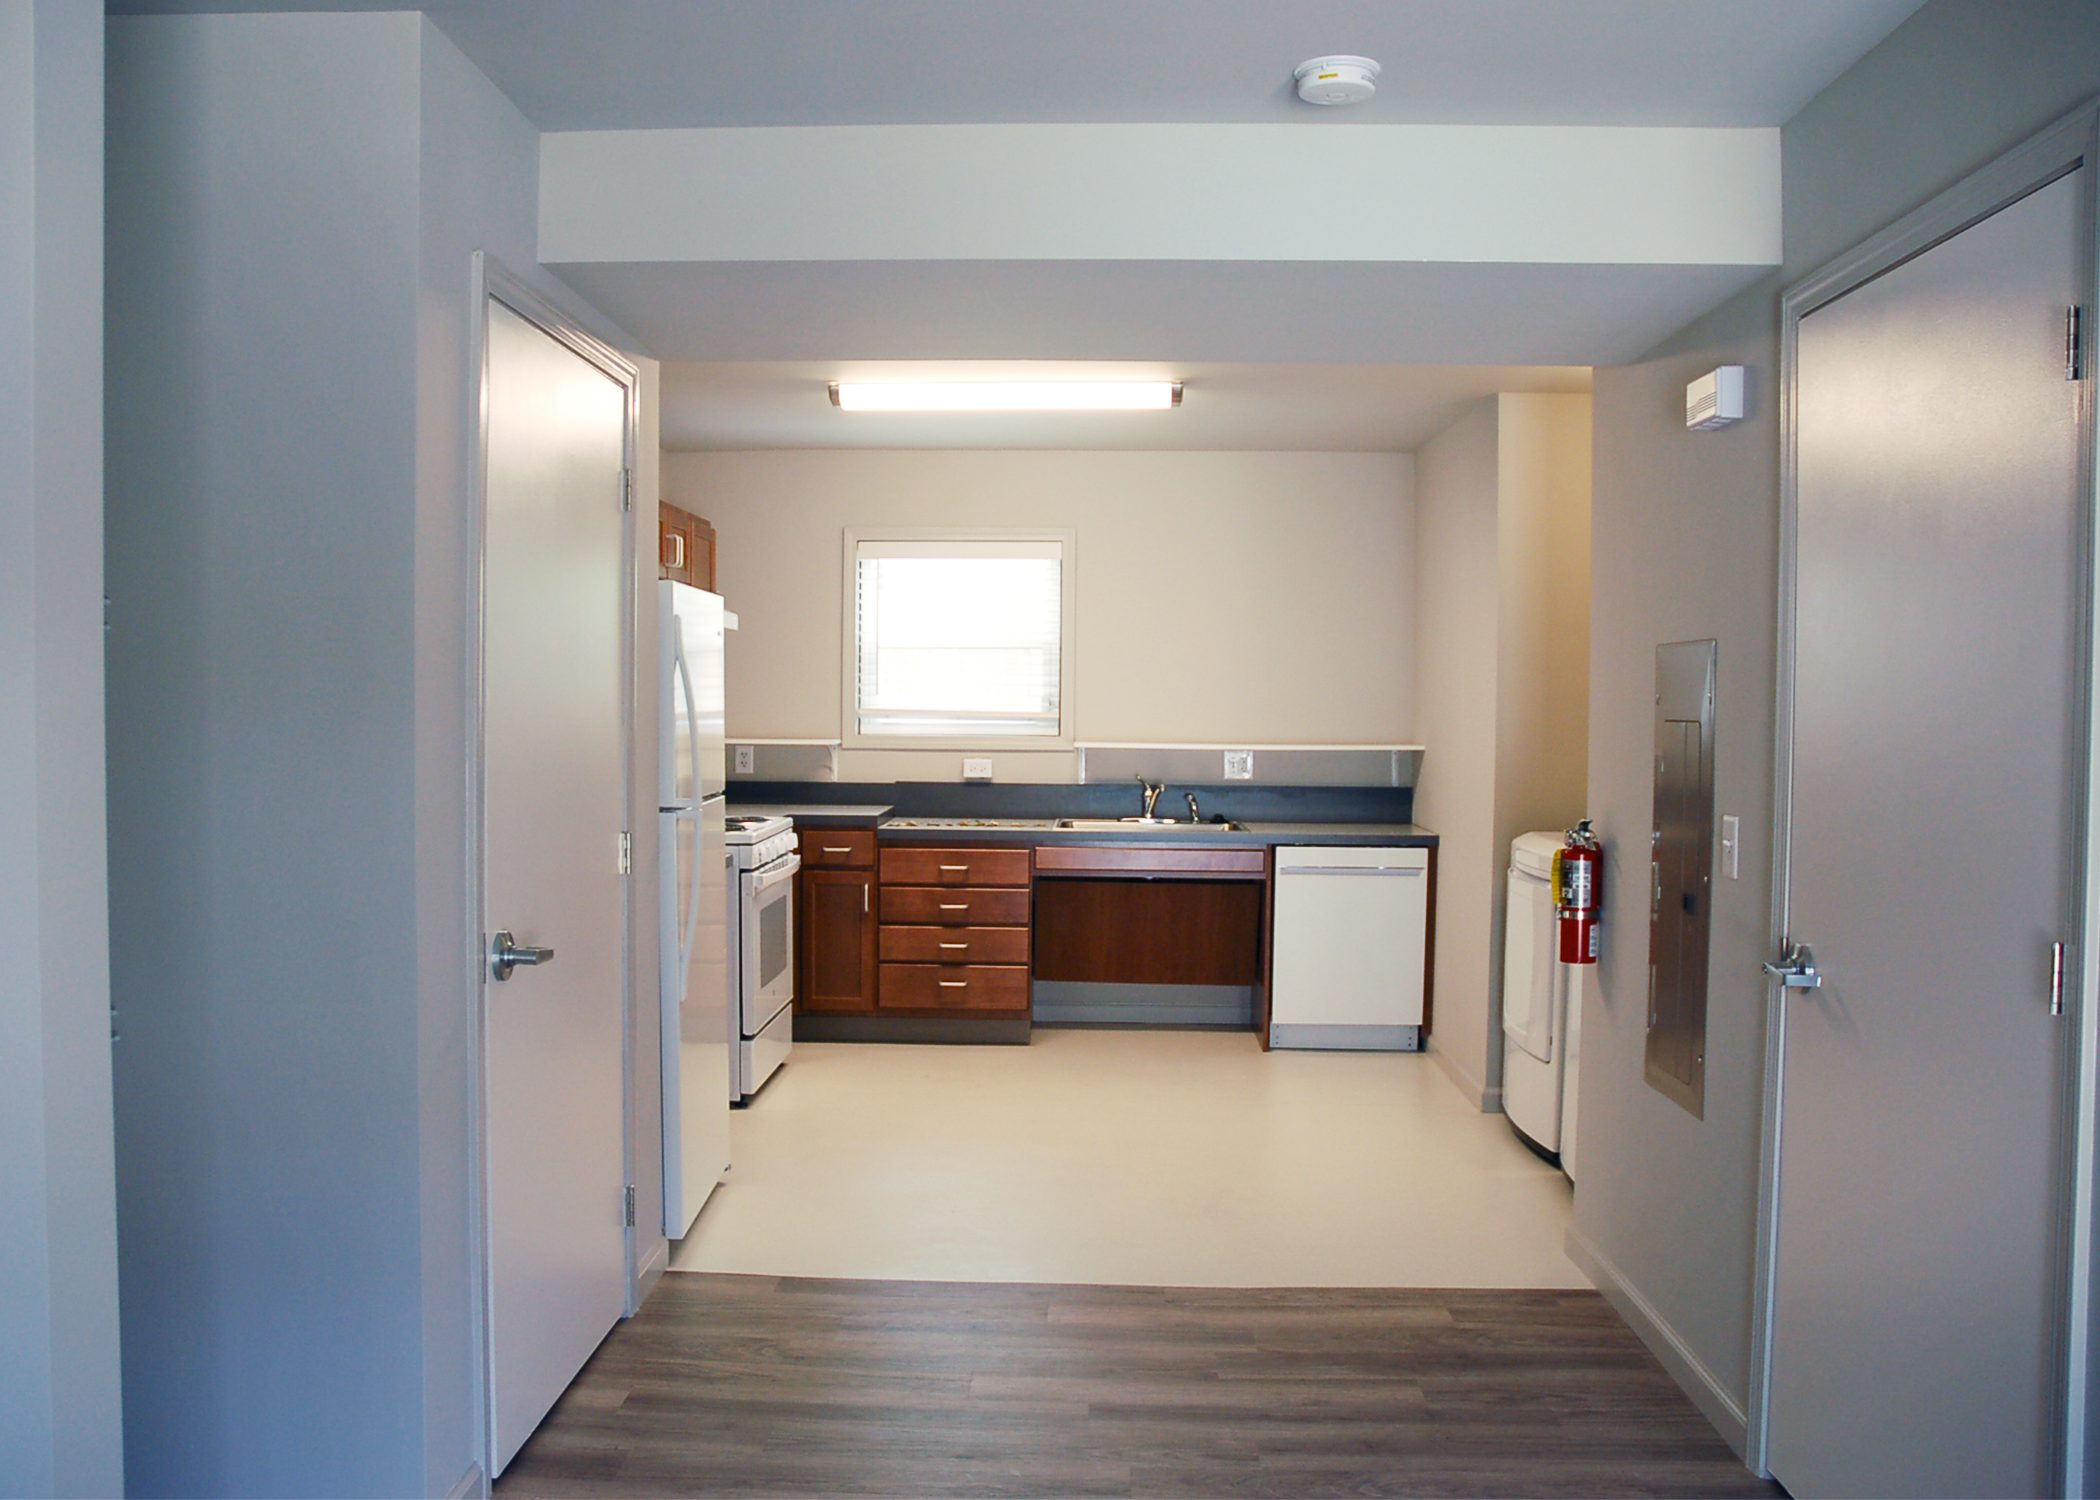 interior of Milestone Apartments with view of kitchen